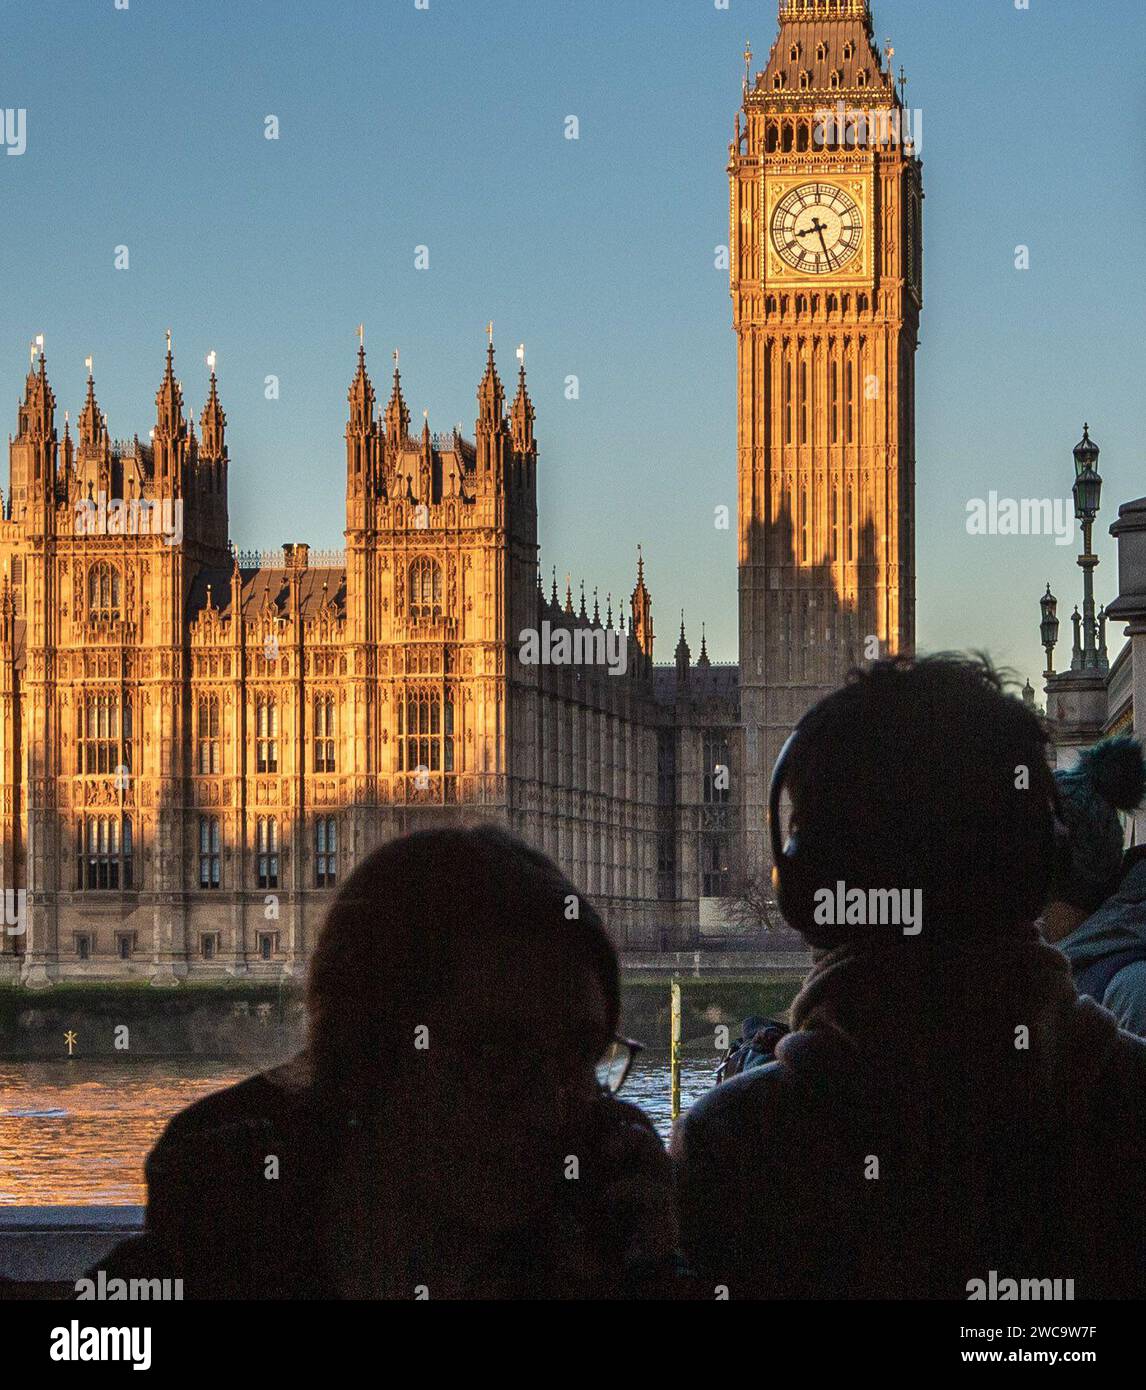 London England Uk 15th Jan 2024 British Parliament Palace Of Westminster Is Seen From Across The River Thames Credit Image Tayfun Salcizuma Press Wire Editorial Usage Only! Not For Commercial Usage! Credit Zuma Press Incalamy Live News 2WC9W7F 